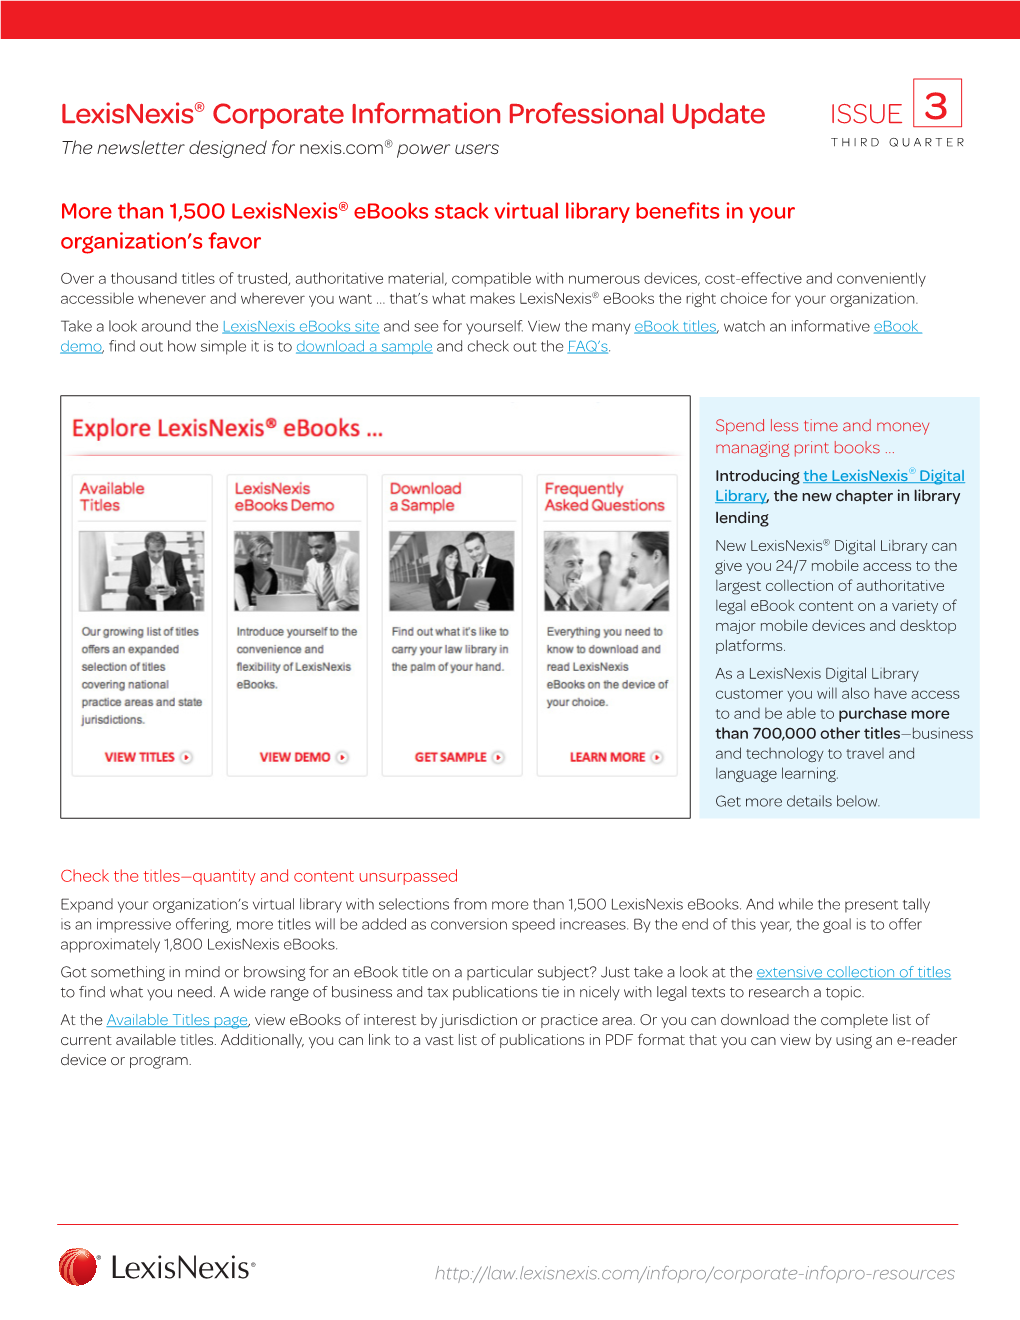 Lexisnexis® Corporate Information Professional Update ISSUE 3 the Newsletter Designed for Nexis.Com® Power Users THIRD QUARTER